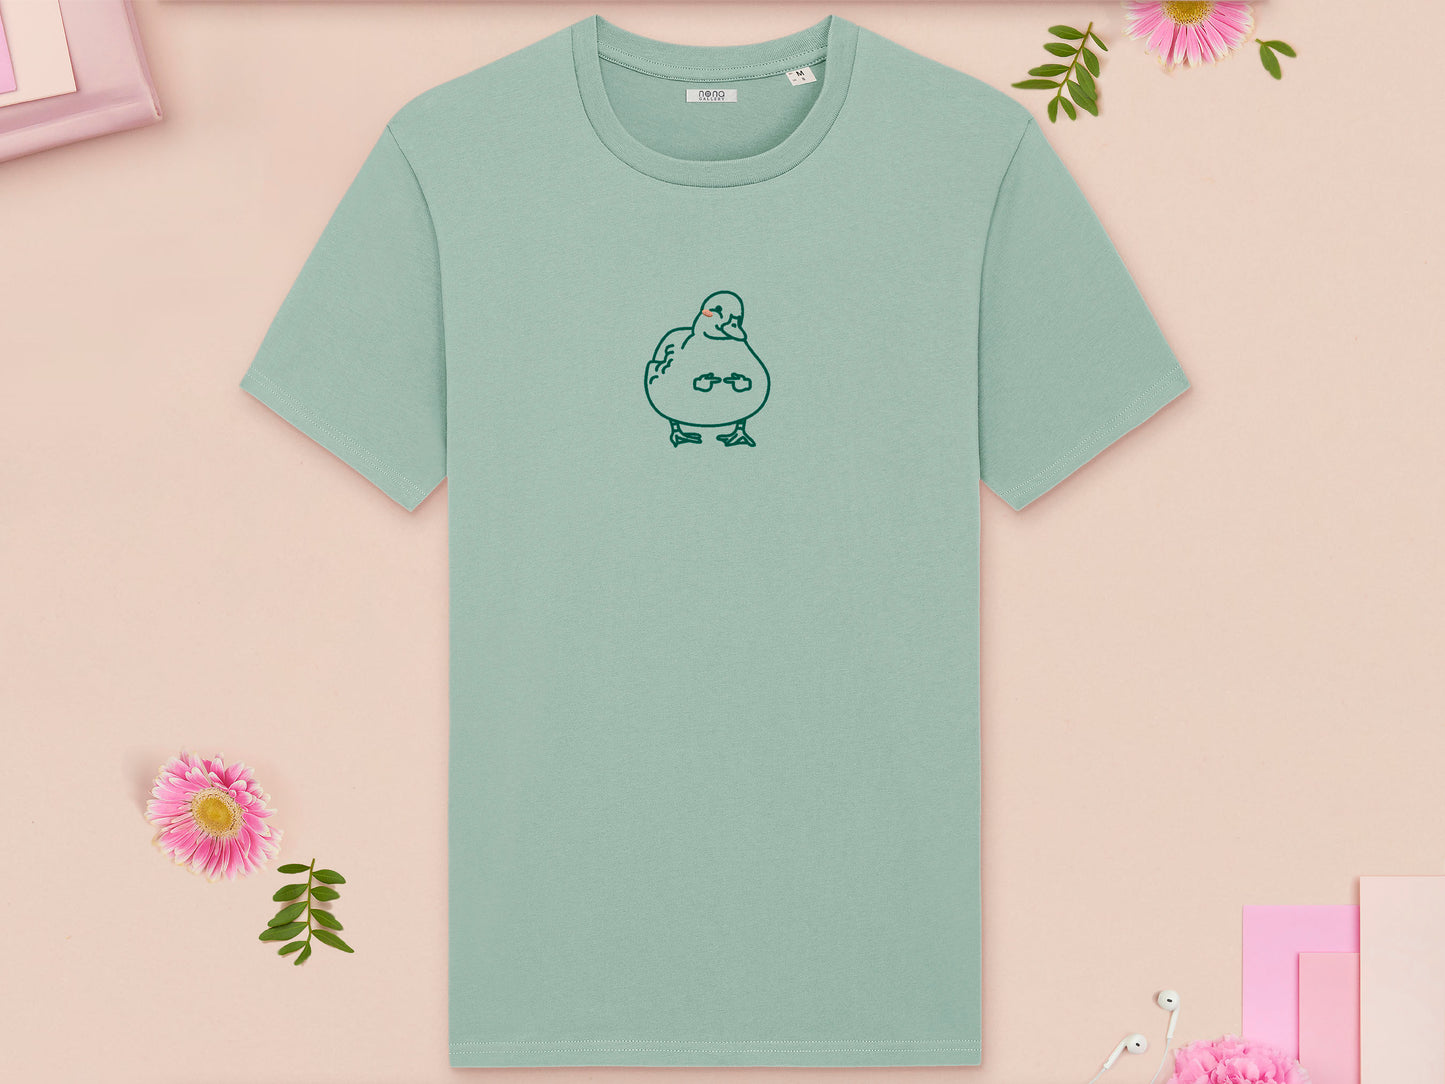 A green crew neck short sleeve t-shirt, with an embroidered green thread design of cute blushing duck with the for me finger hand emoji symbols